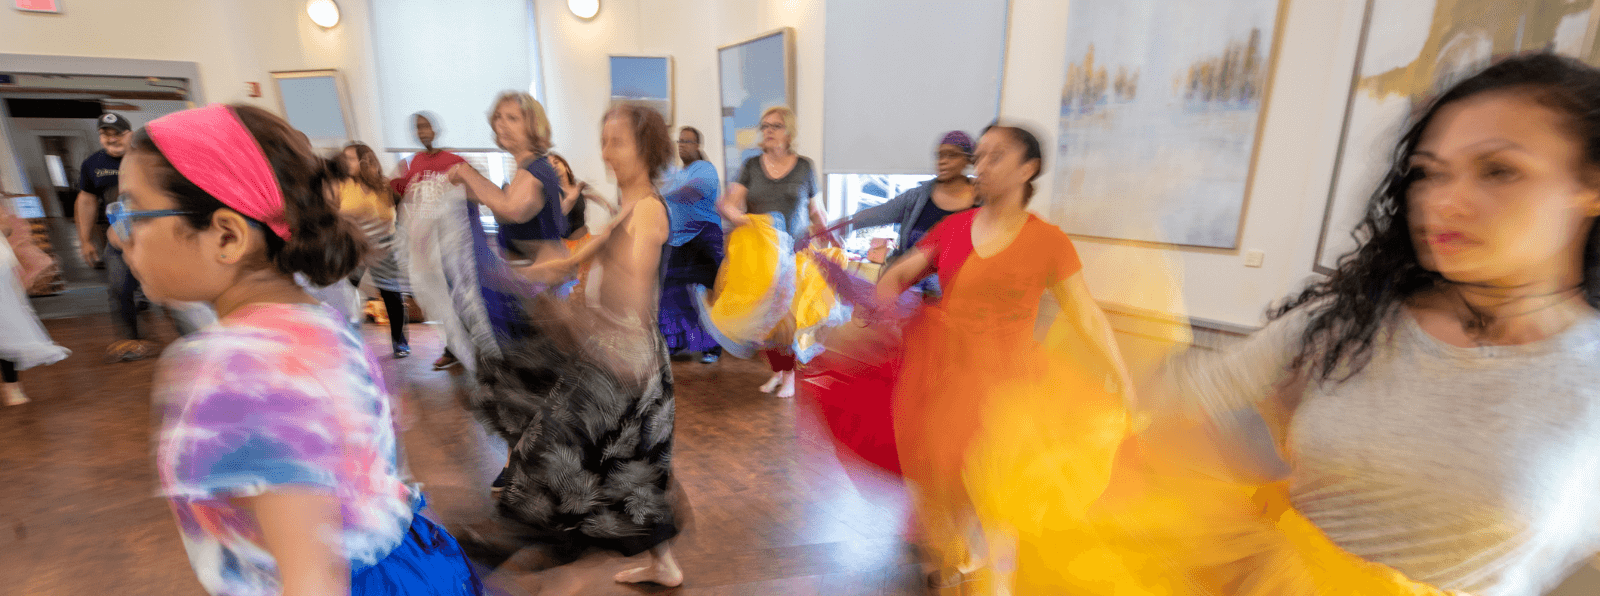 Dancers in colorful dresses